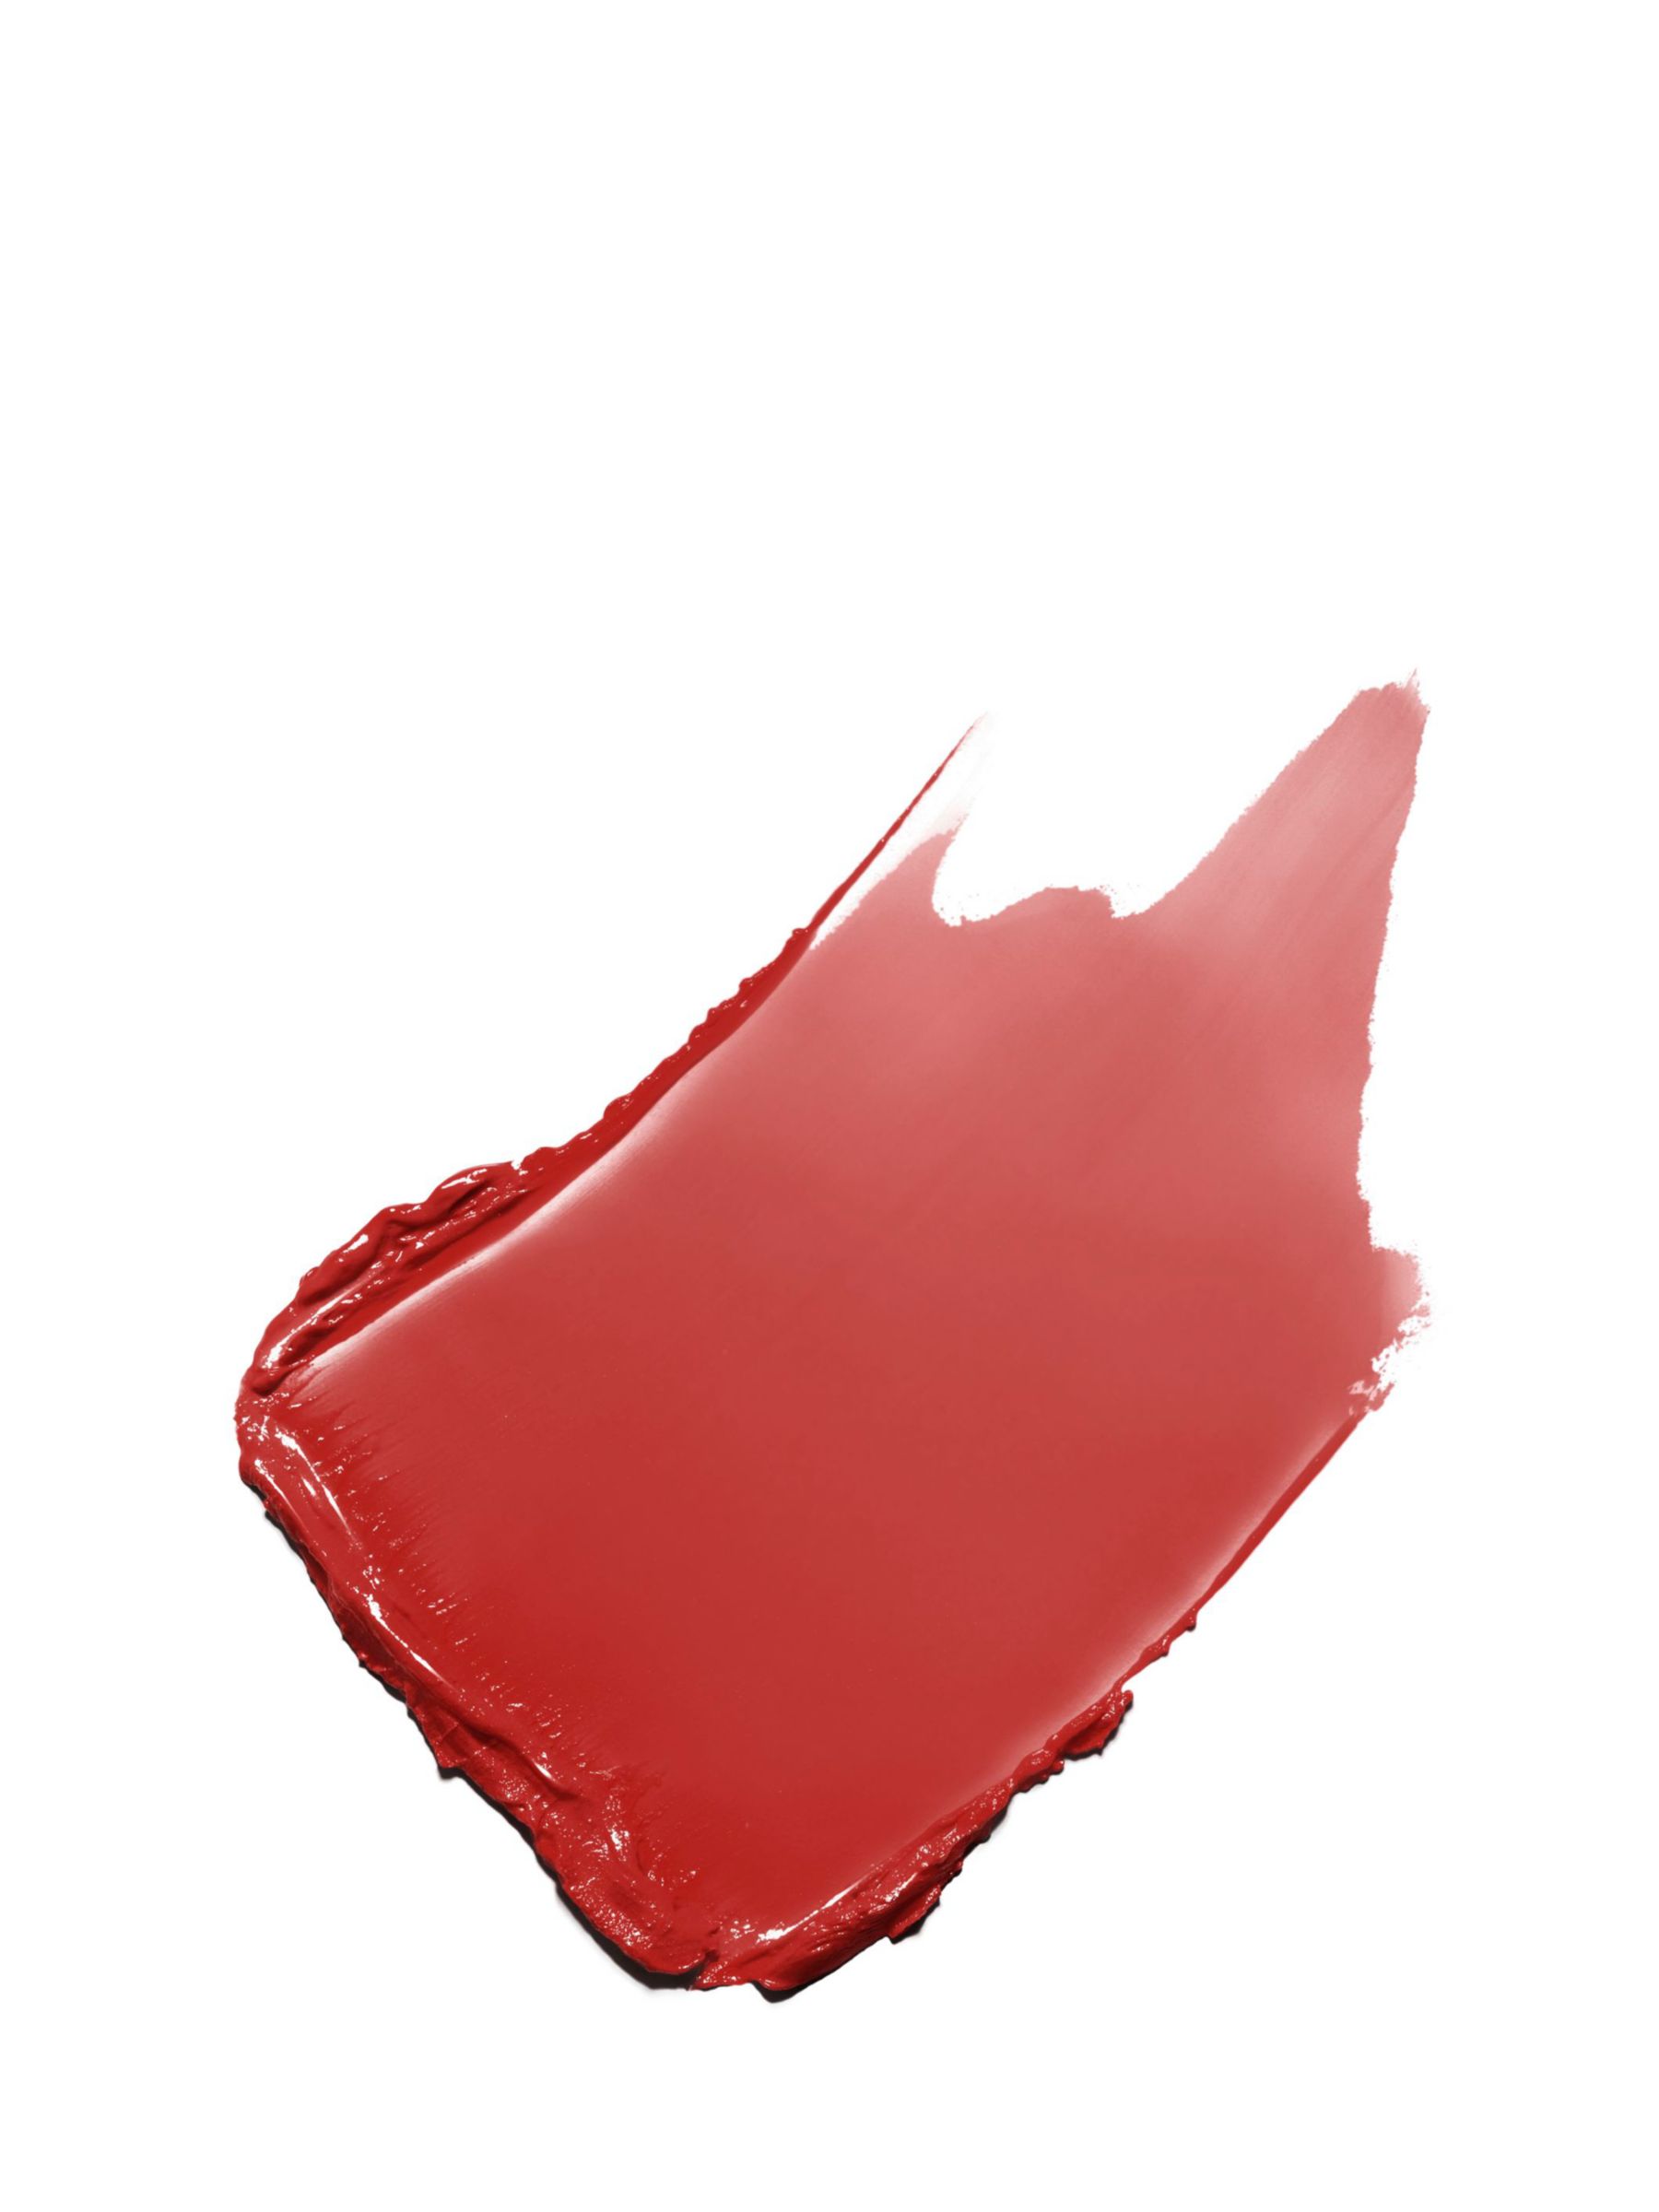 CHANEL Rouge Coco Flash Colour, Shine, Intensity In A Flash, 176 Escapade 2